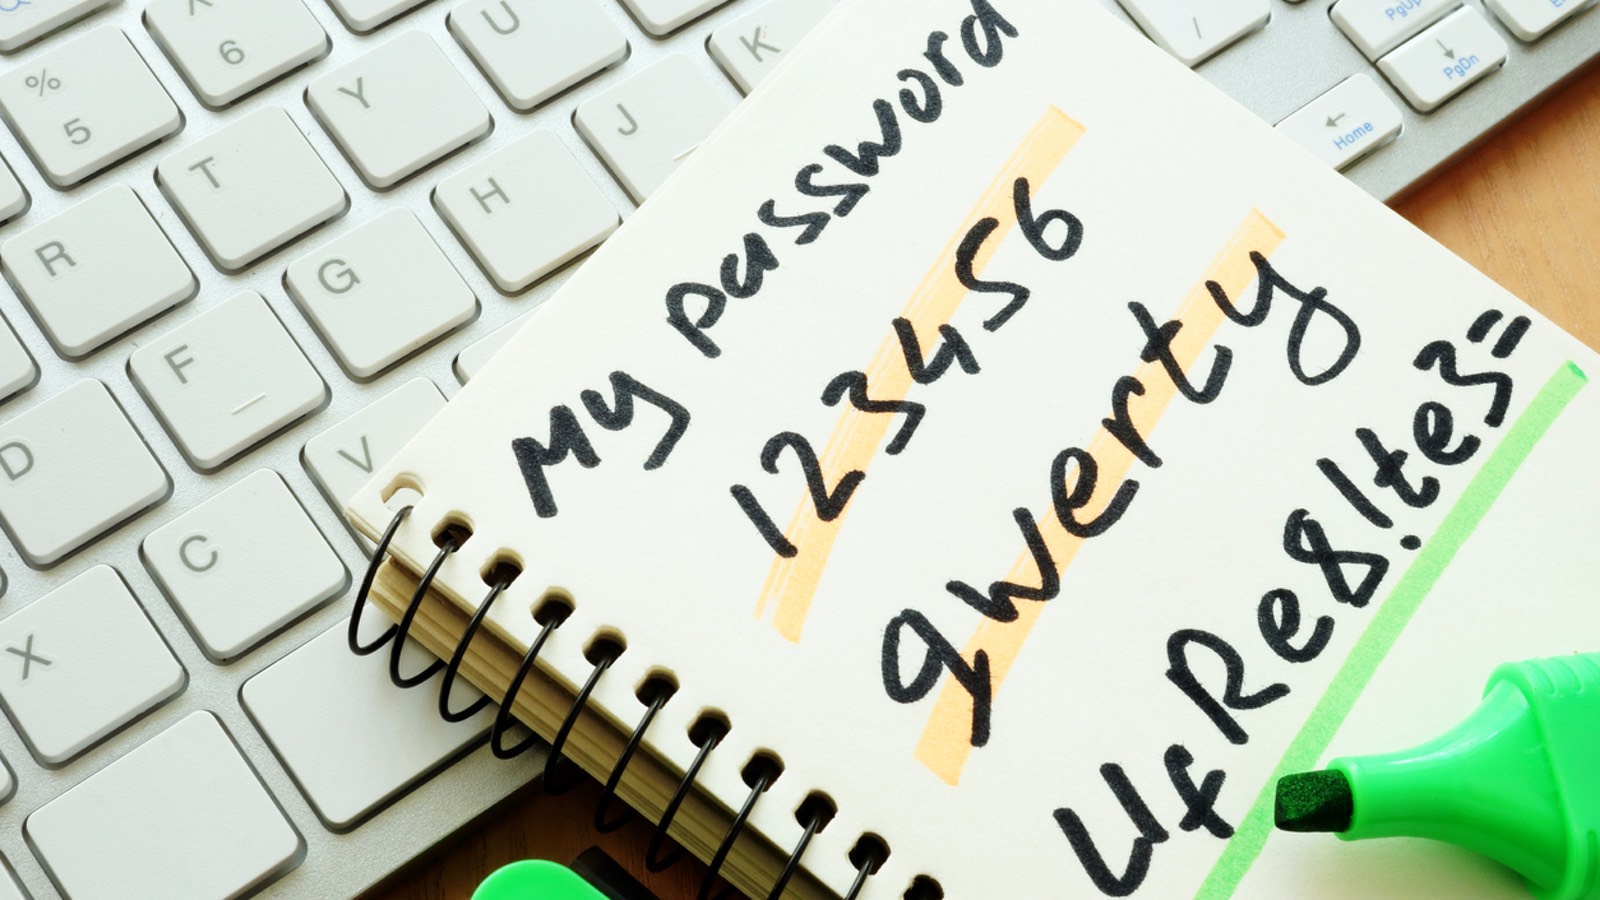 How to Get Started With a Password Manager